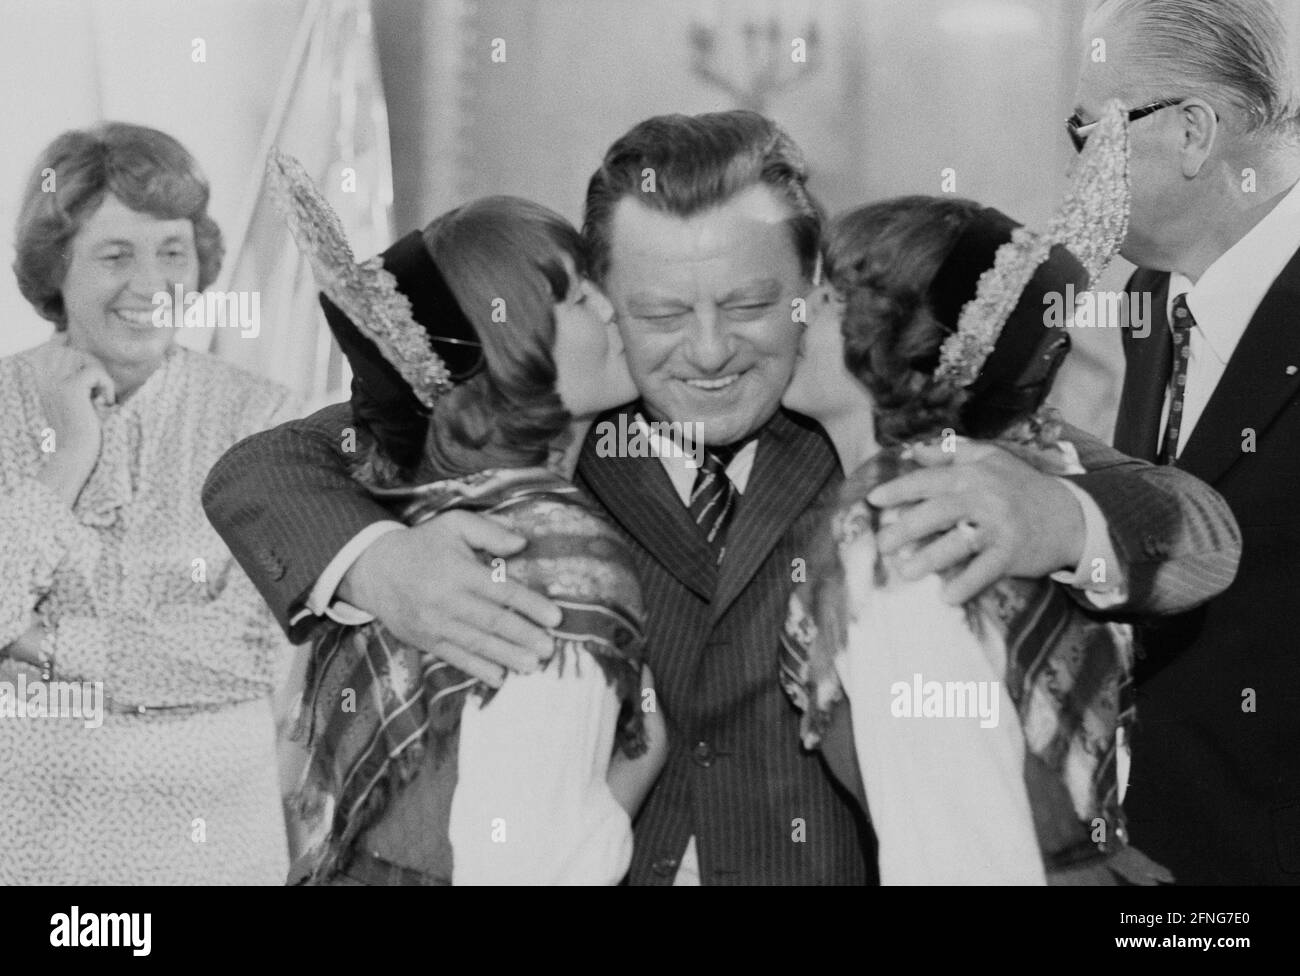 On his 65th birthday, Bavarian Prime Minister Franz Josef Strauß receives a kiss from Martina (left) and Erika, both wearing traditional dresses with headgear. Strauß' wife Marianne can be seen in the background on the left. [automated translation] Stock Photo